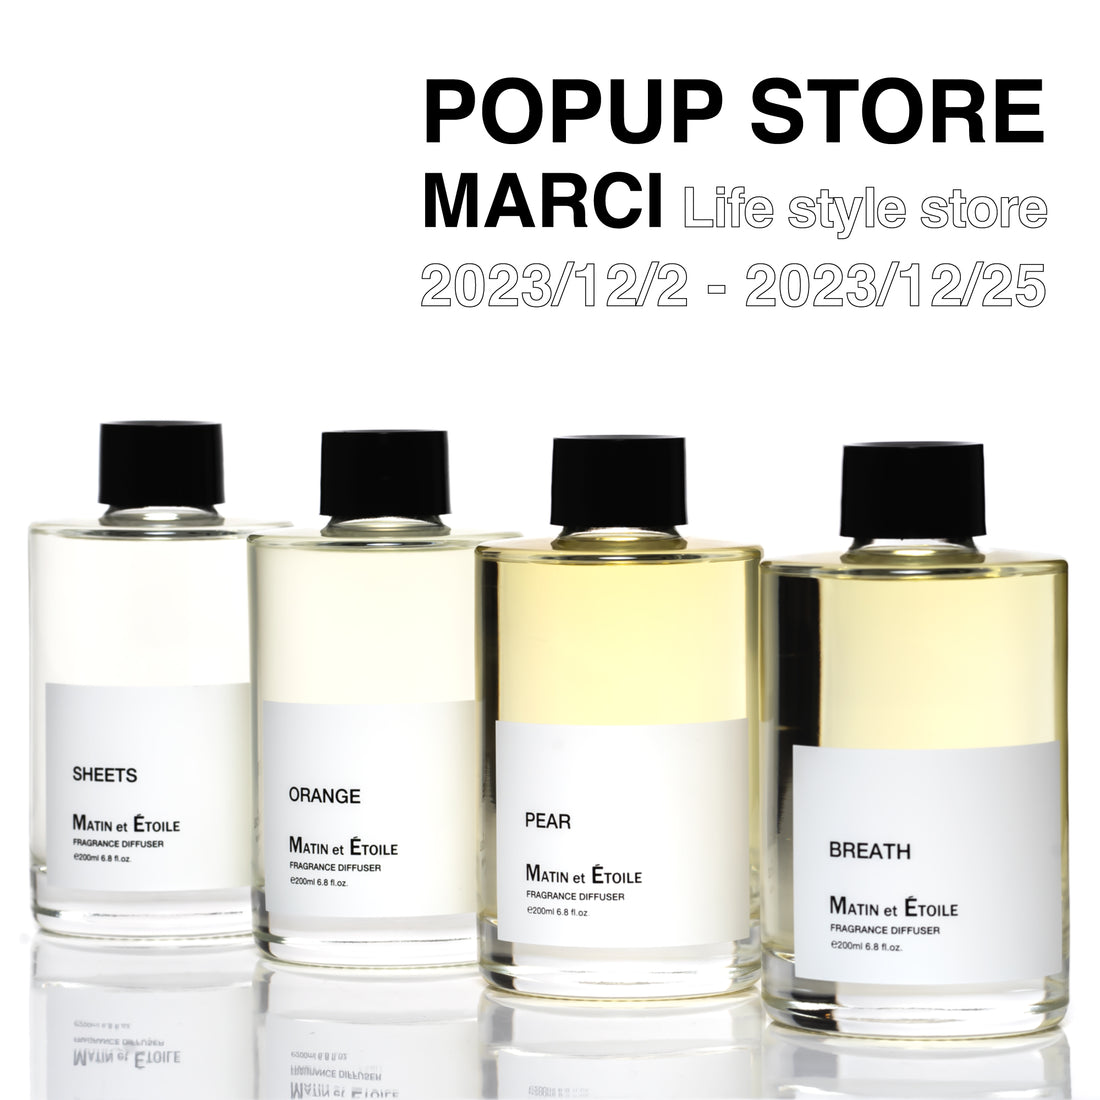 POPUP STORE｜12/2-12/25 at MARCI